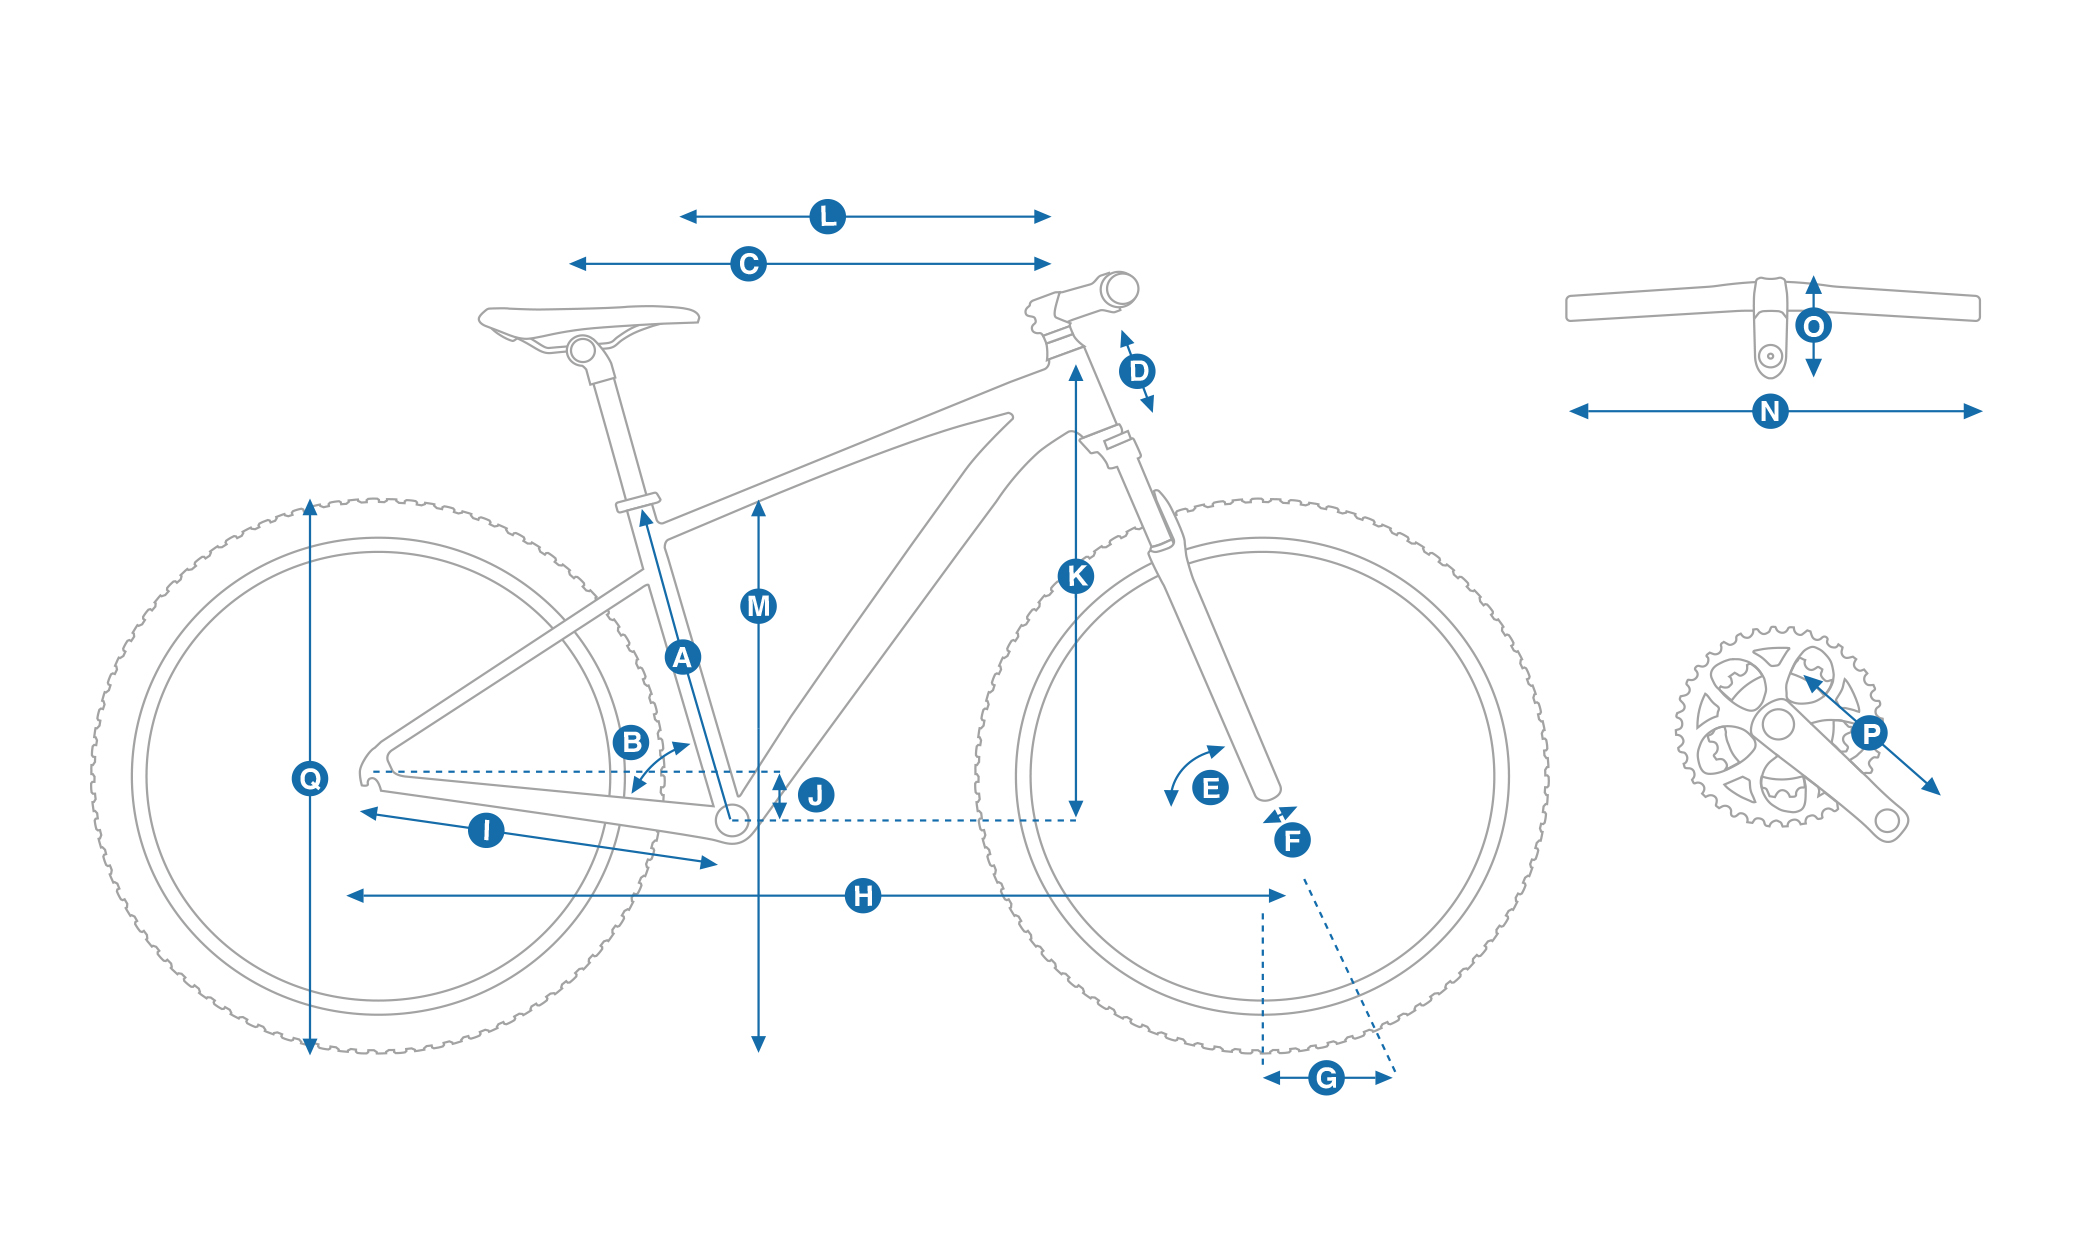 bike diagram with measurements referenced in table that follows